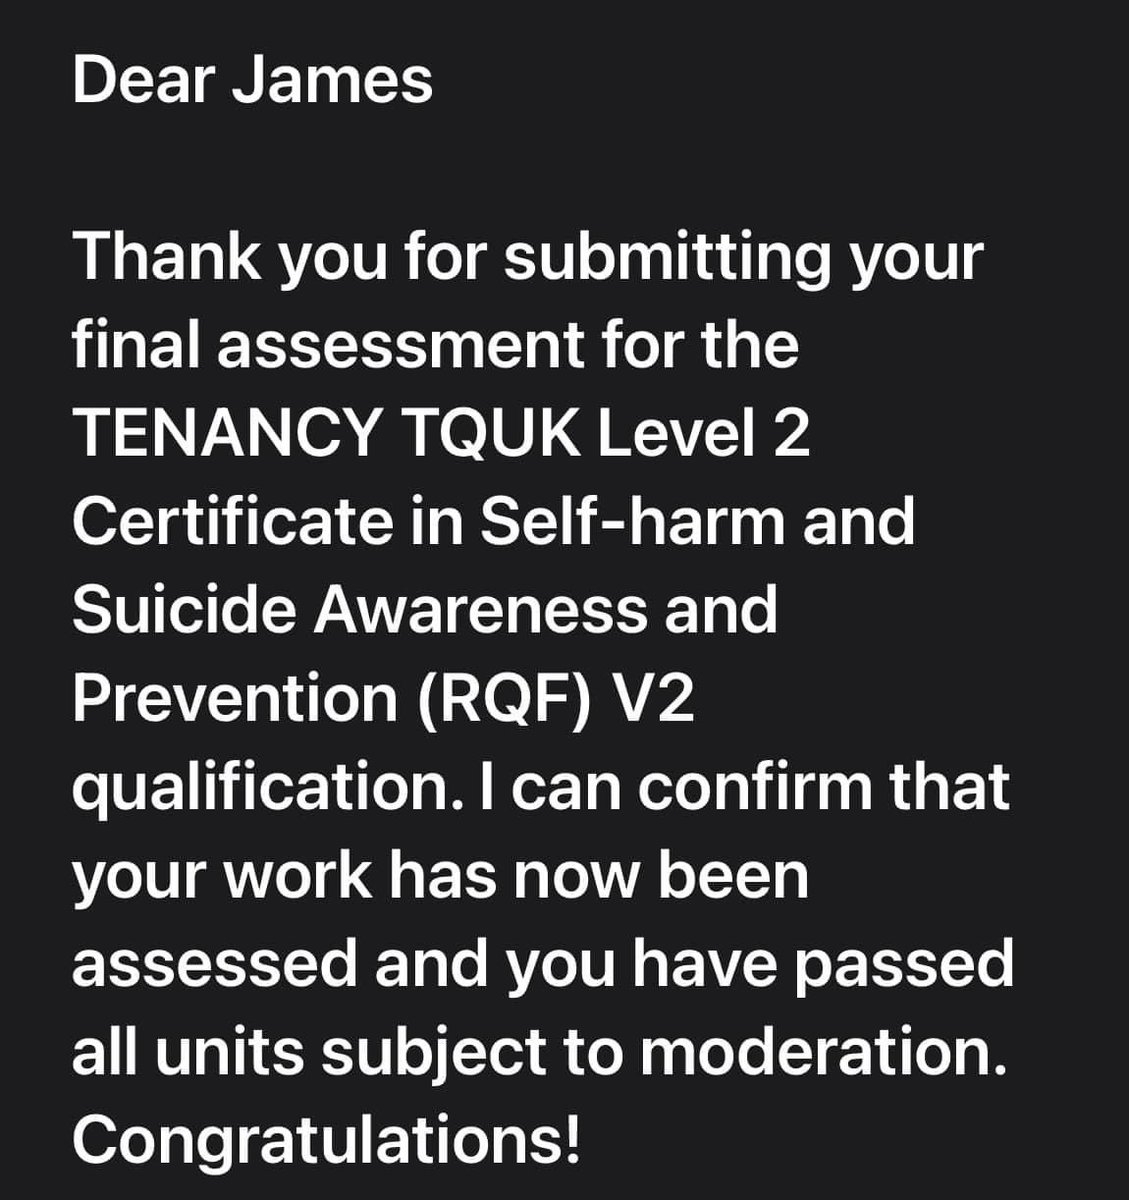 Great to come home to this email tonight ,finding out I had passed all 4 modules. Felling proud of myself. #suicideawareness #suicideprevention